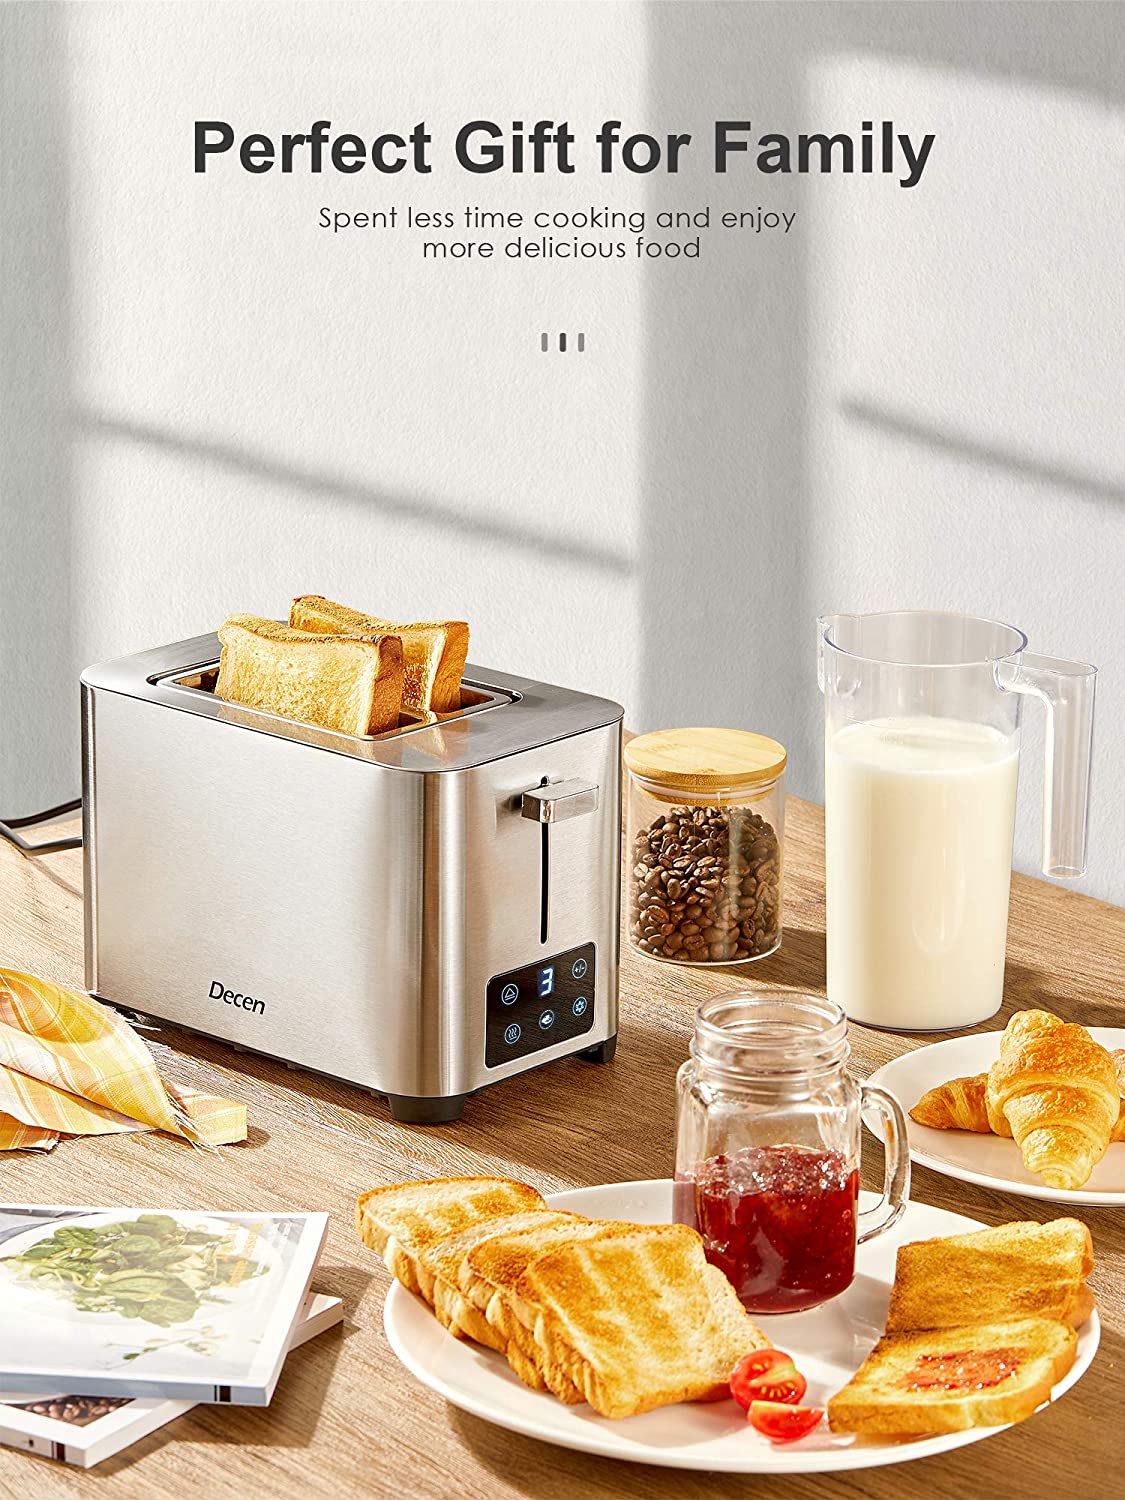 iClanda Toaster 2 Slice, 1.5 In Wide Slot Toaster, Cool Touch with 6 Shade  Selectors, 2 Slice Toaster with High Lift Lever, Removal Crumb Tray, for  Bagels, Waffles, Bread, Bun or English Muffins 